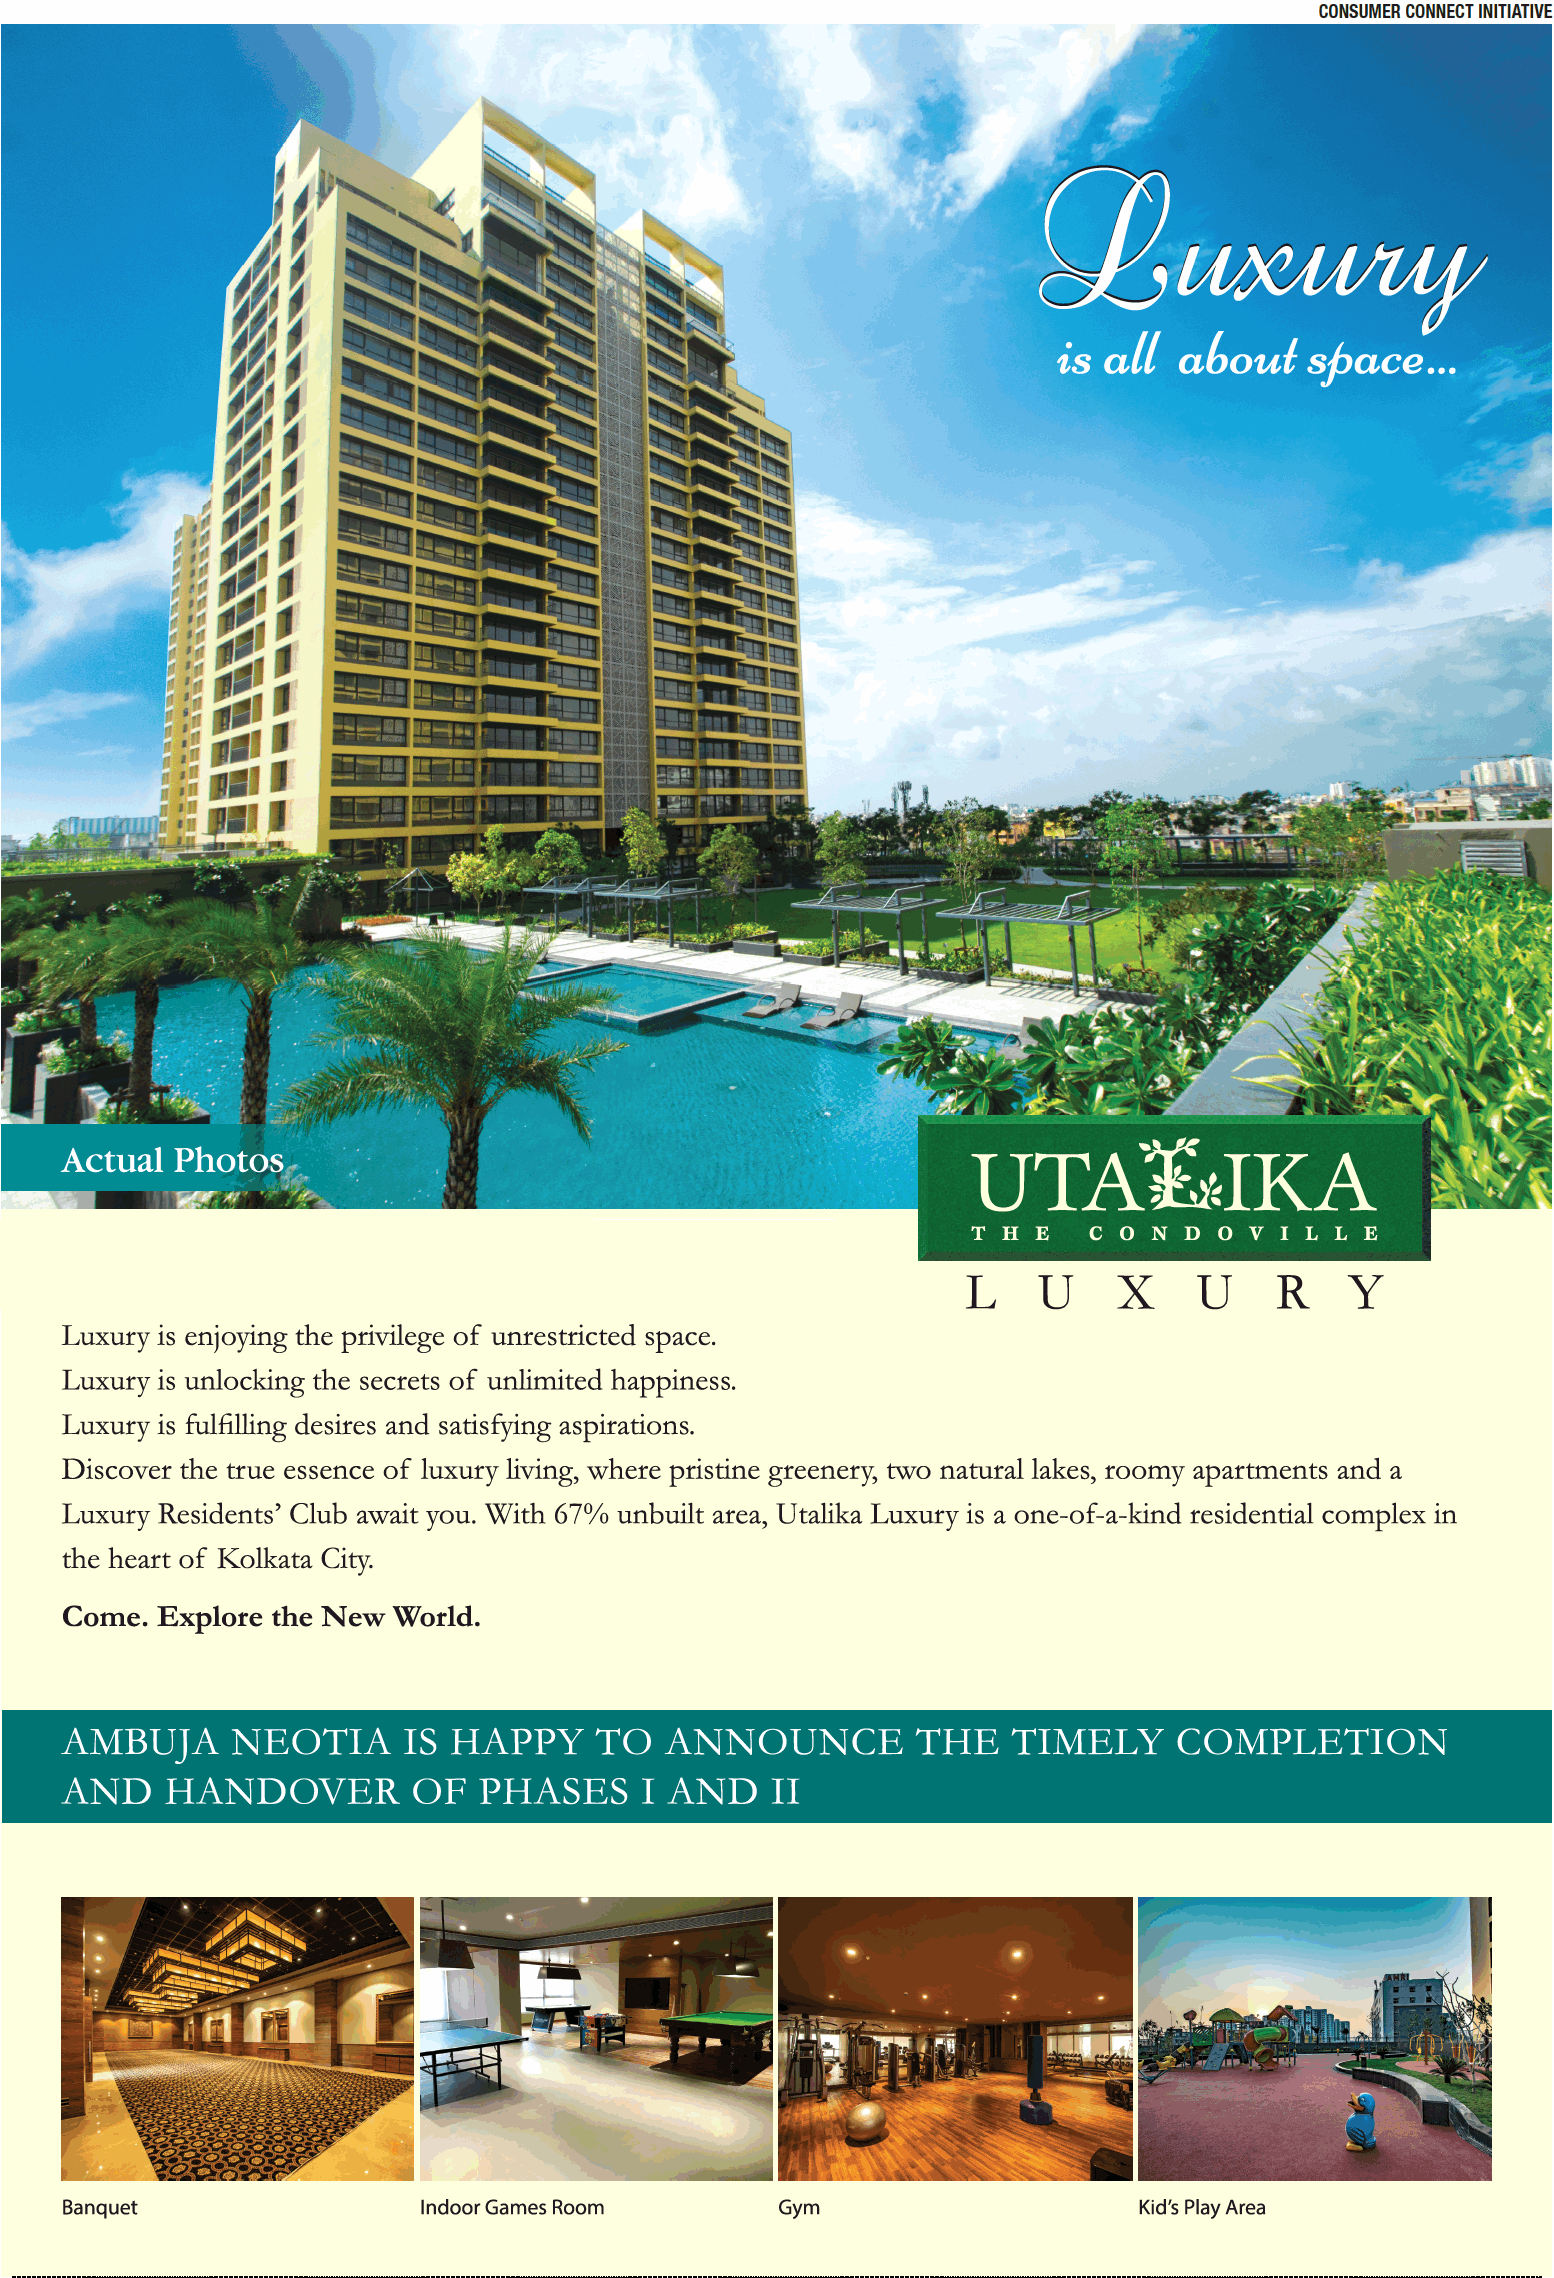 Ambuja Neotia Utalika is happy to announce the timely completion and handover of phases 1 and 2 in Kolkata